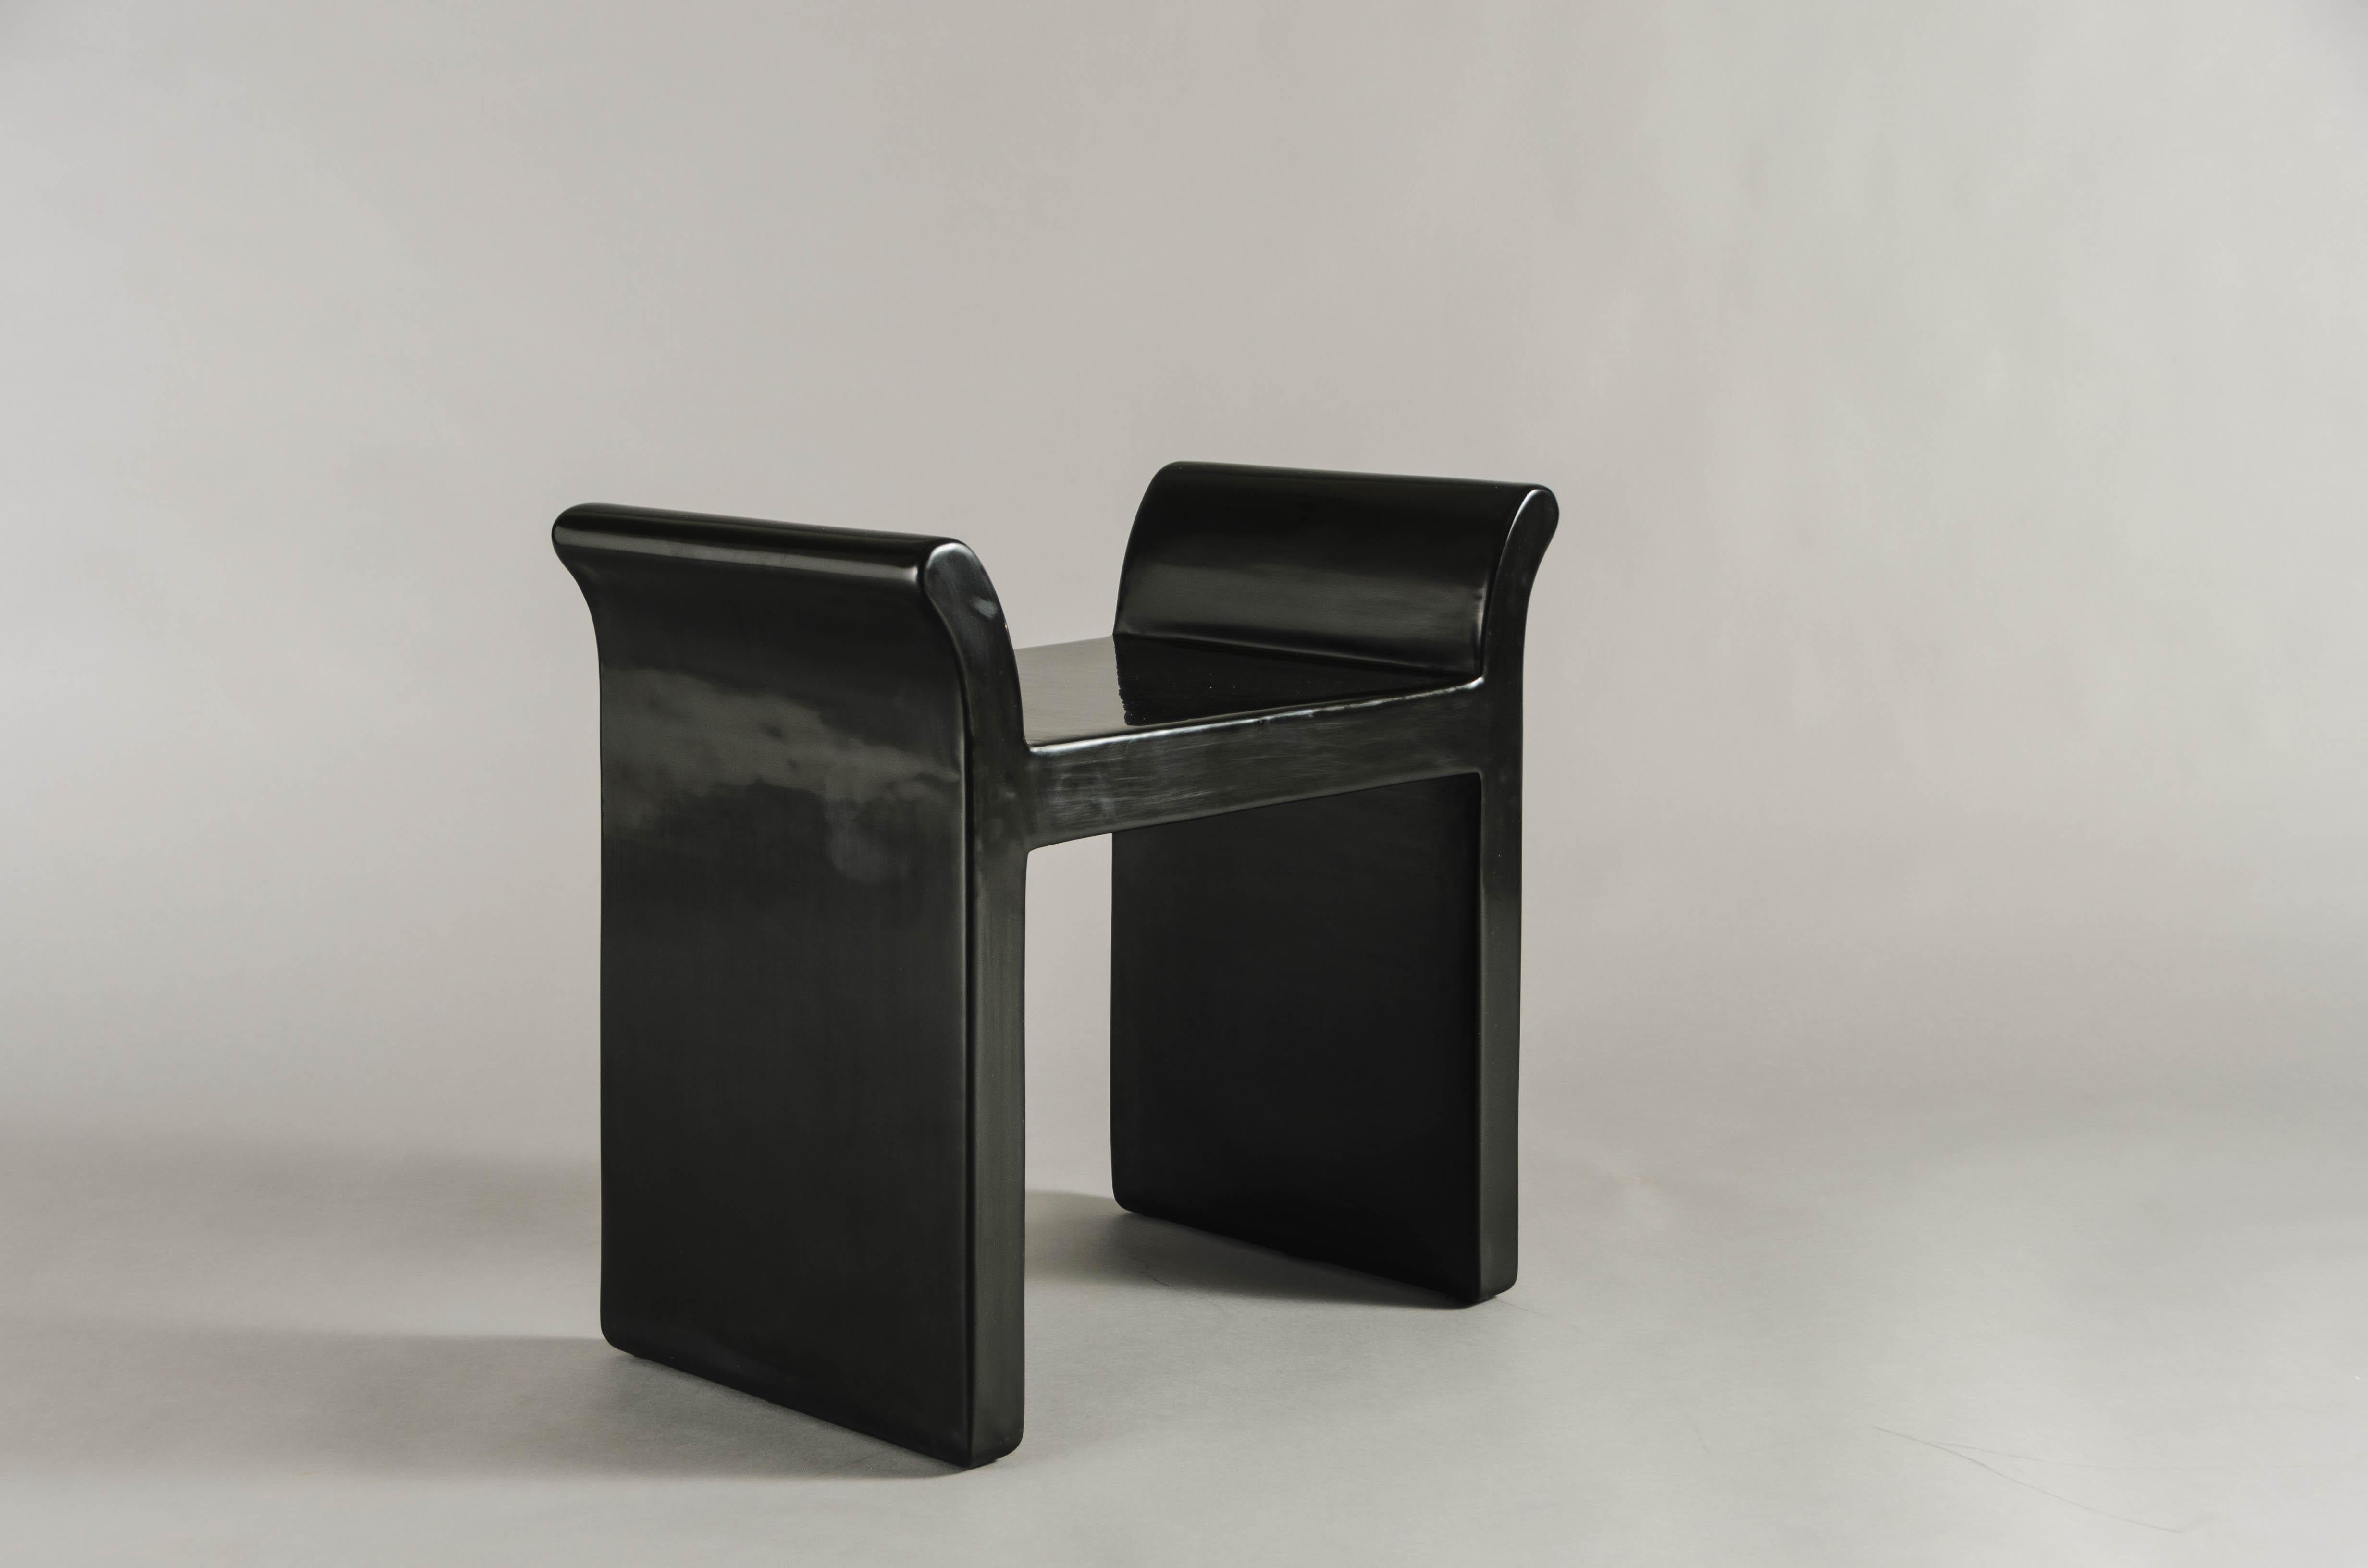 Hand-Crafted Contemporary Black Lacquer Vanity Seat by Robert Kuo, Hand Made, Limited Edition For Sale